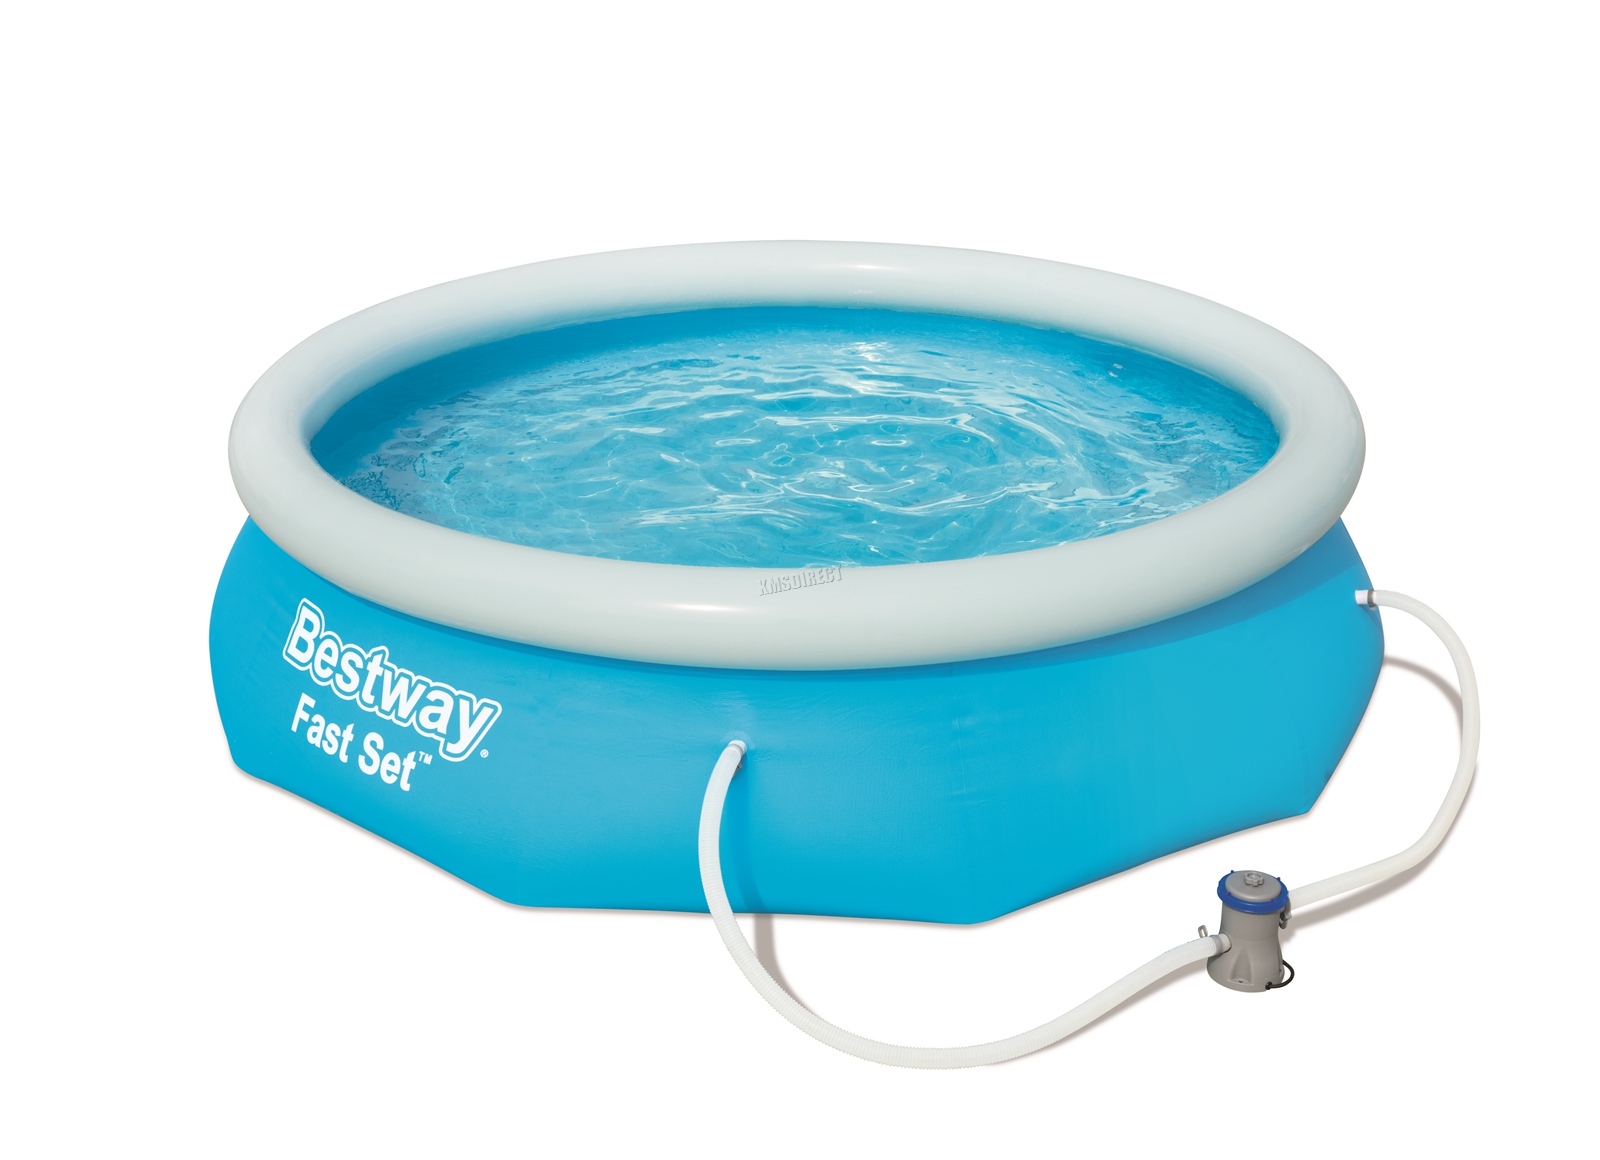 bestway fast set pool filter instructions